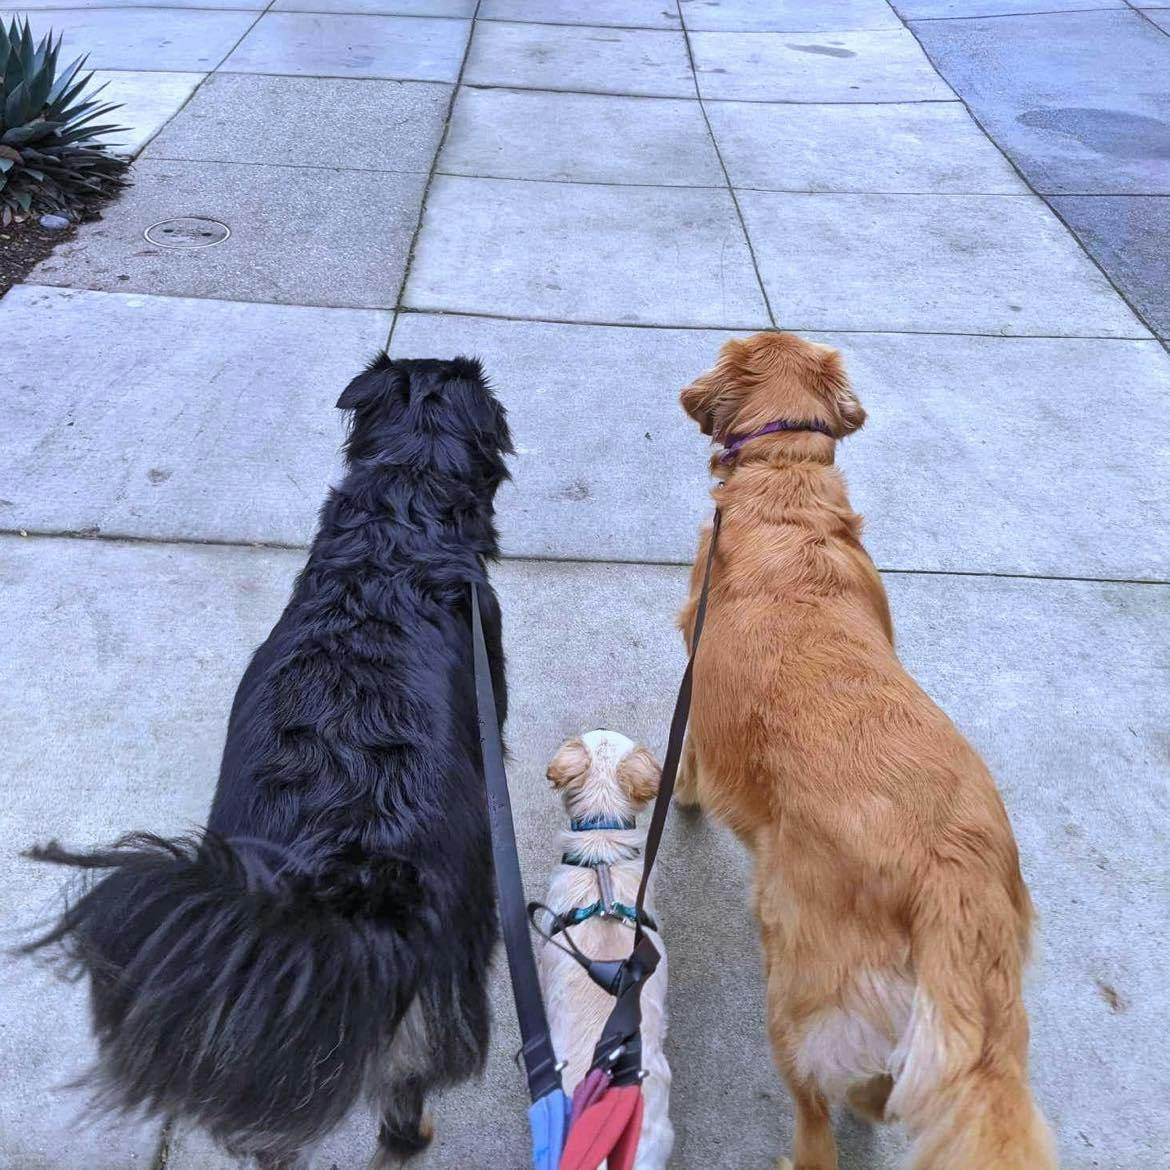 Dogs patiently waiting for walkies